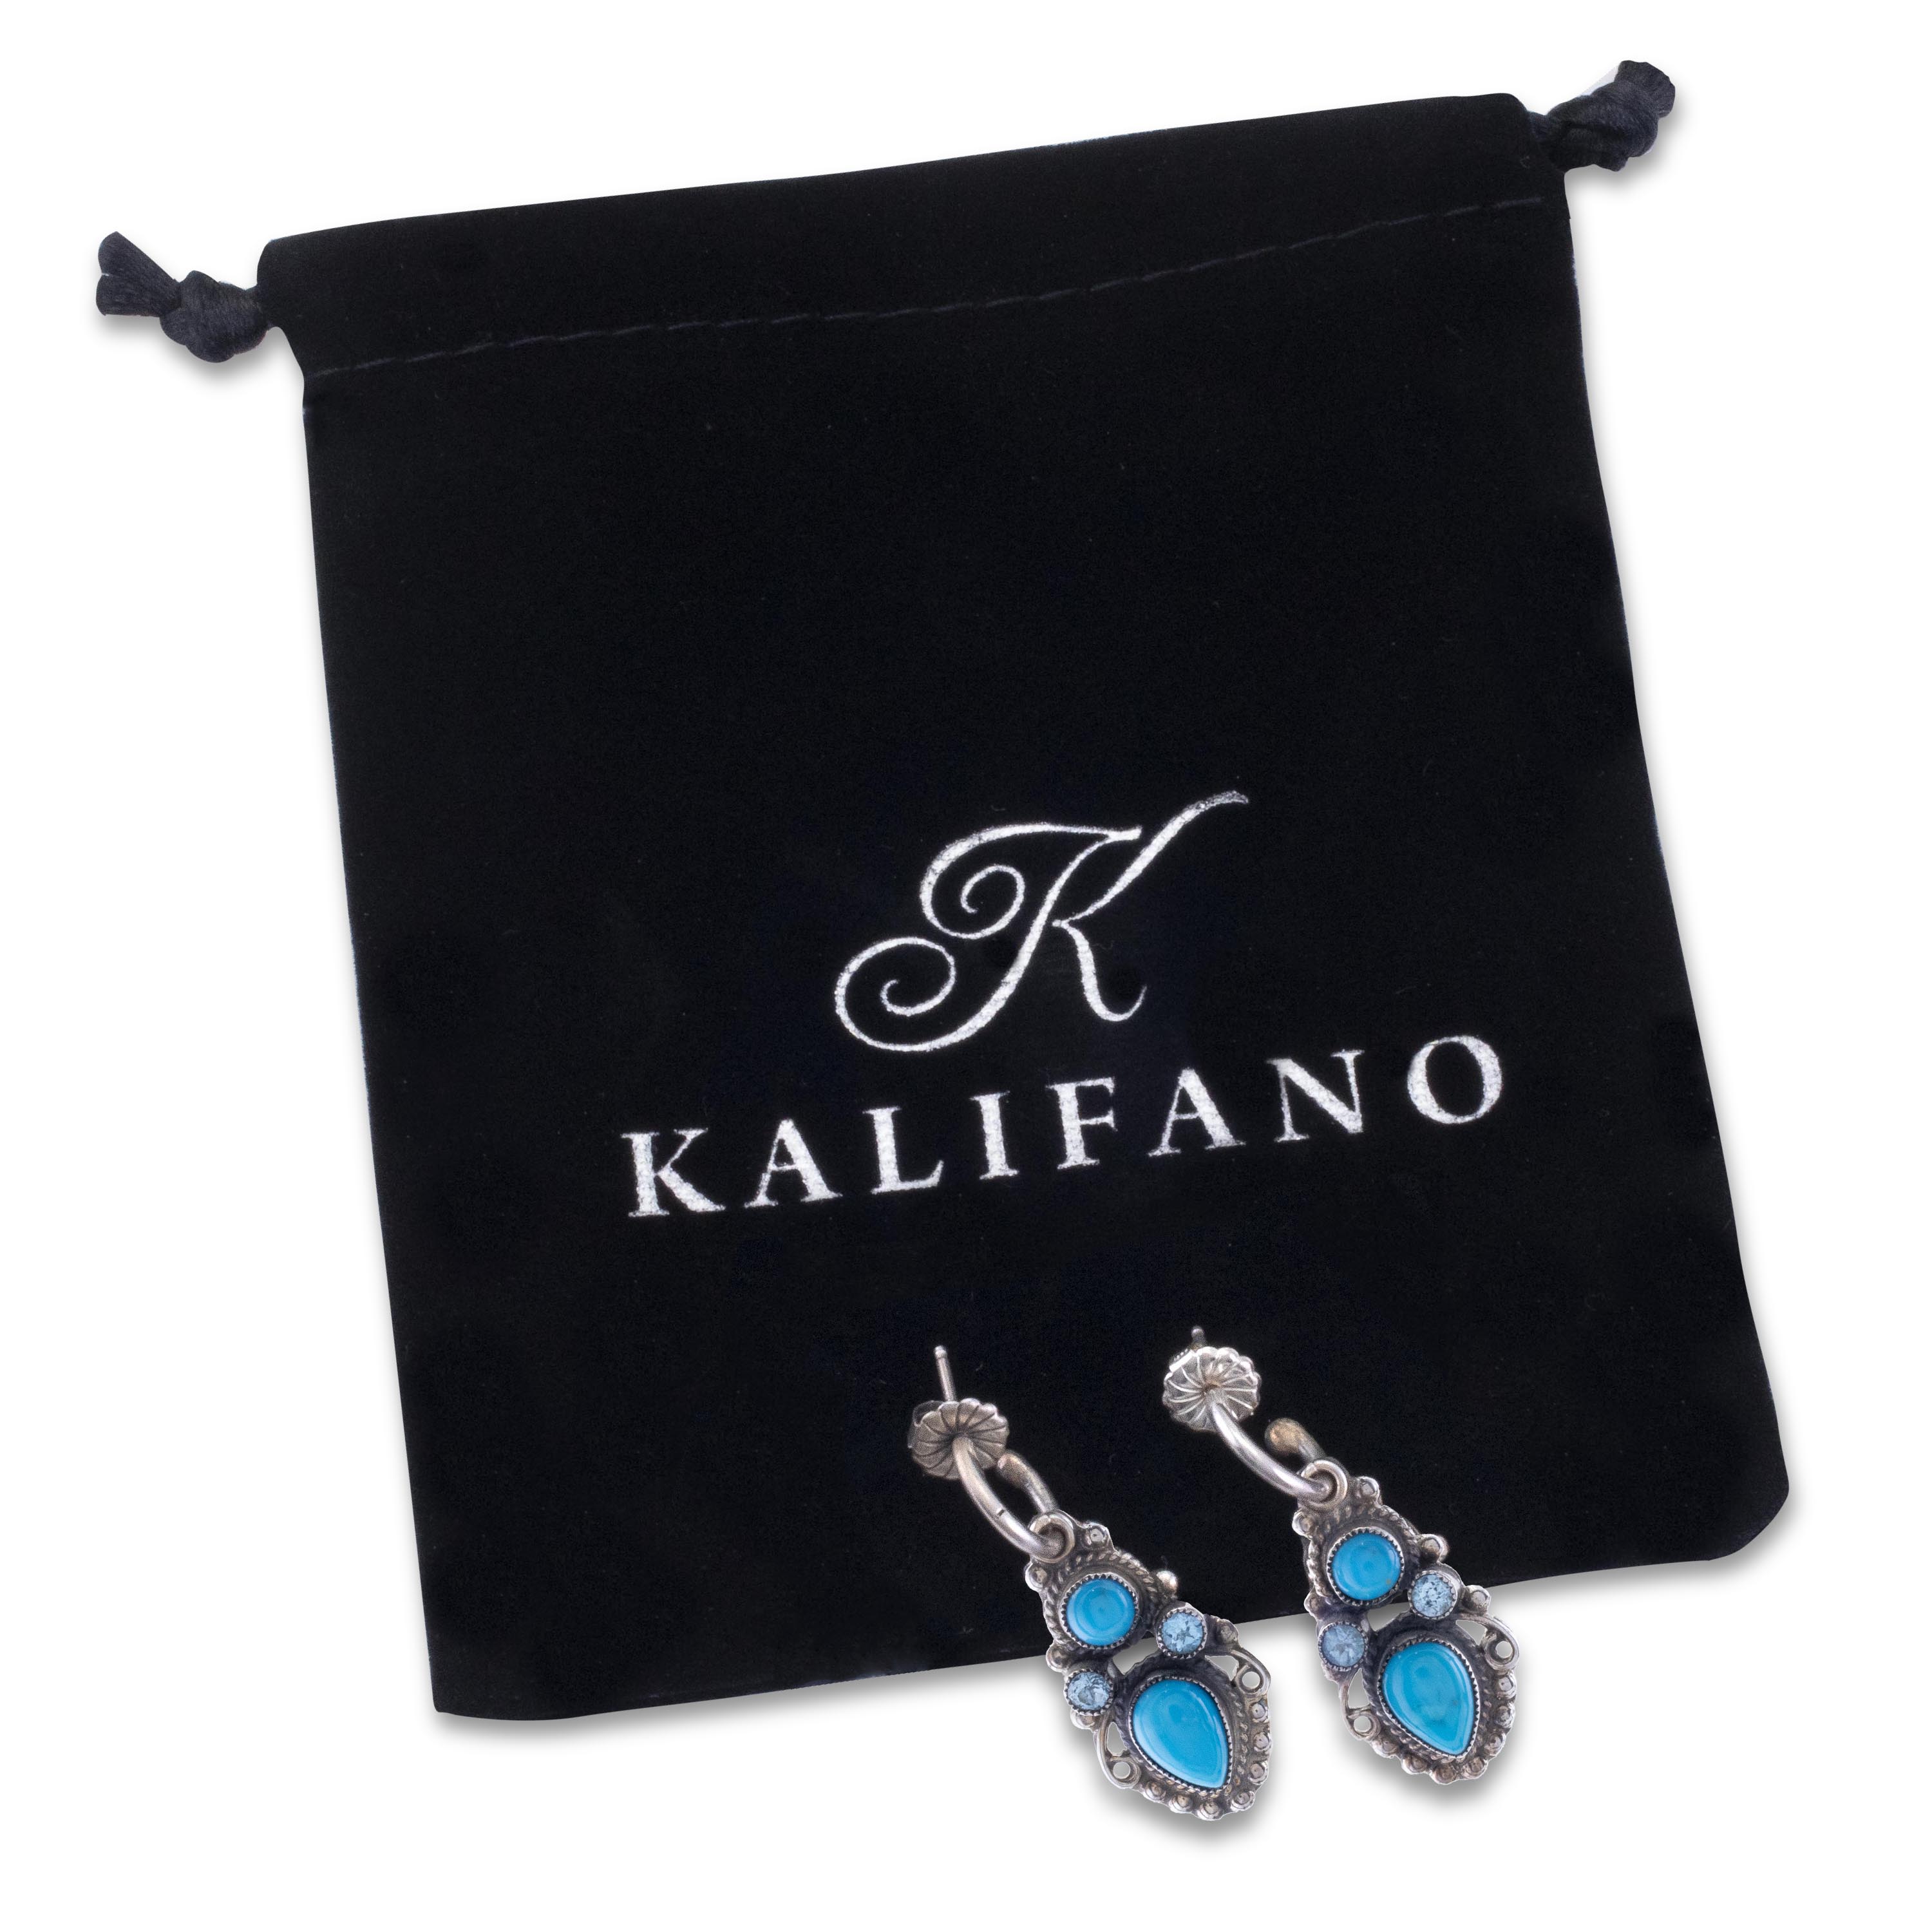 Kalifano Native American Jewelry Leo Feeney Navajo Sleeping Beauty Turquoise and Blue Topaz USA Native American Made 925 Sterling Silver Dangly Earrings NAE1000.004